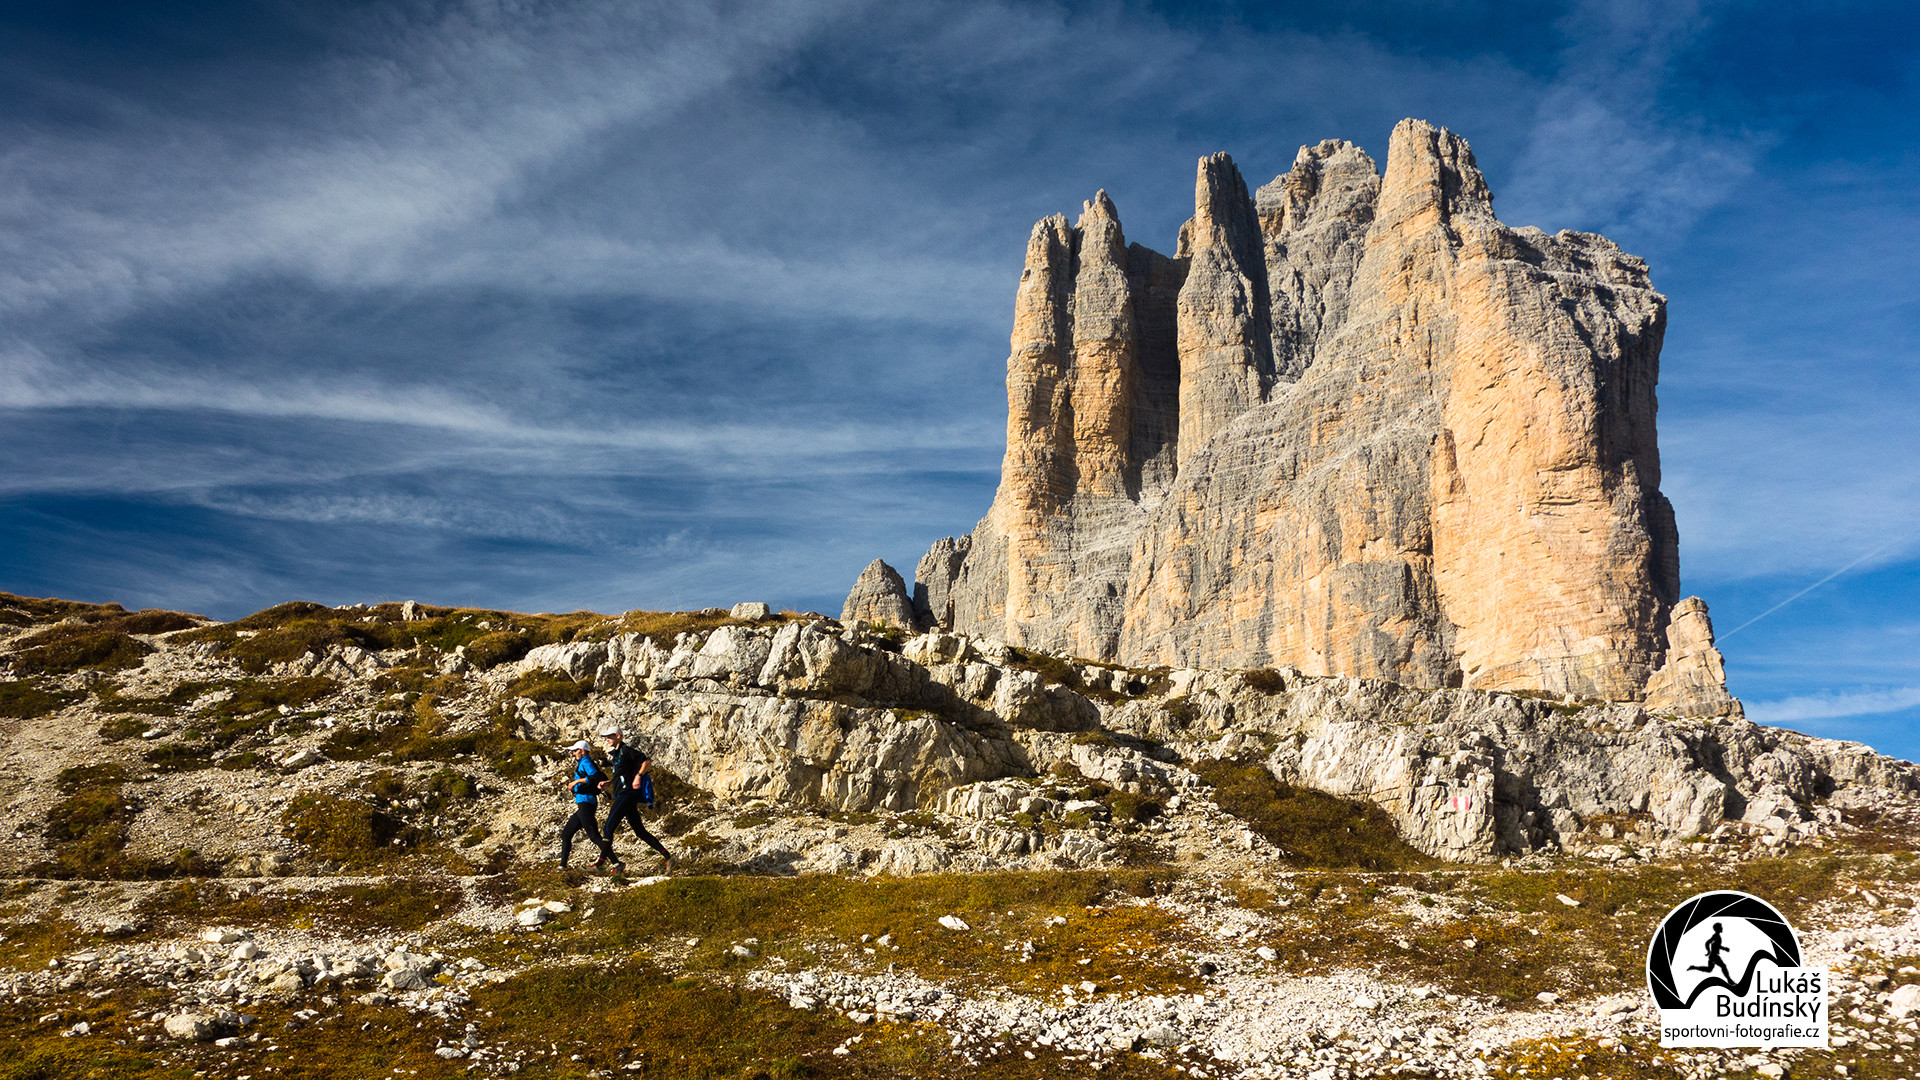 1920x1080 Trail running in dolomites. StÃ¡hnout: 1920px, 1366px ...